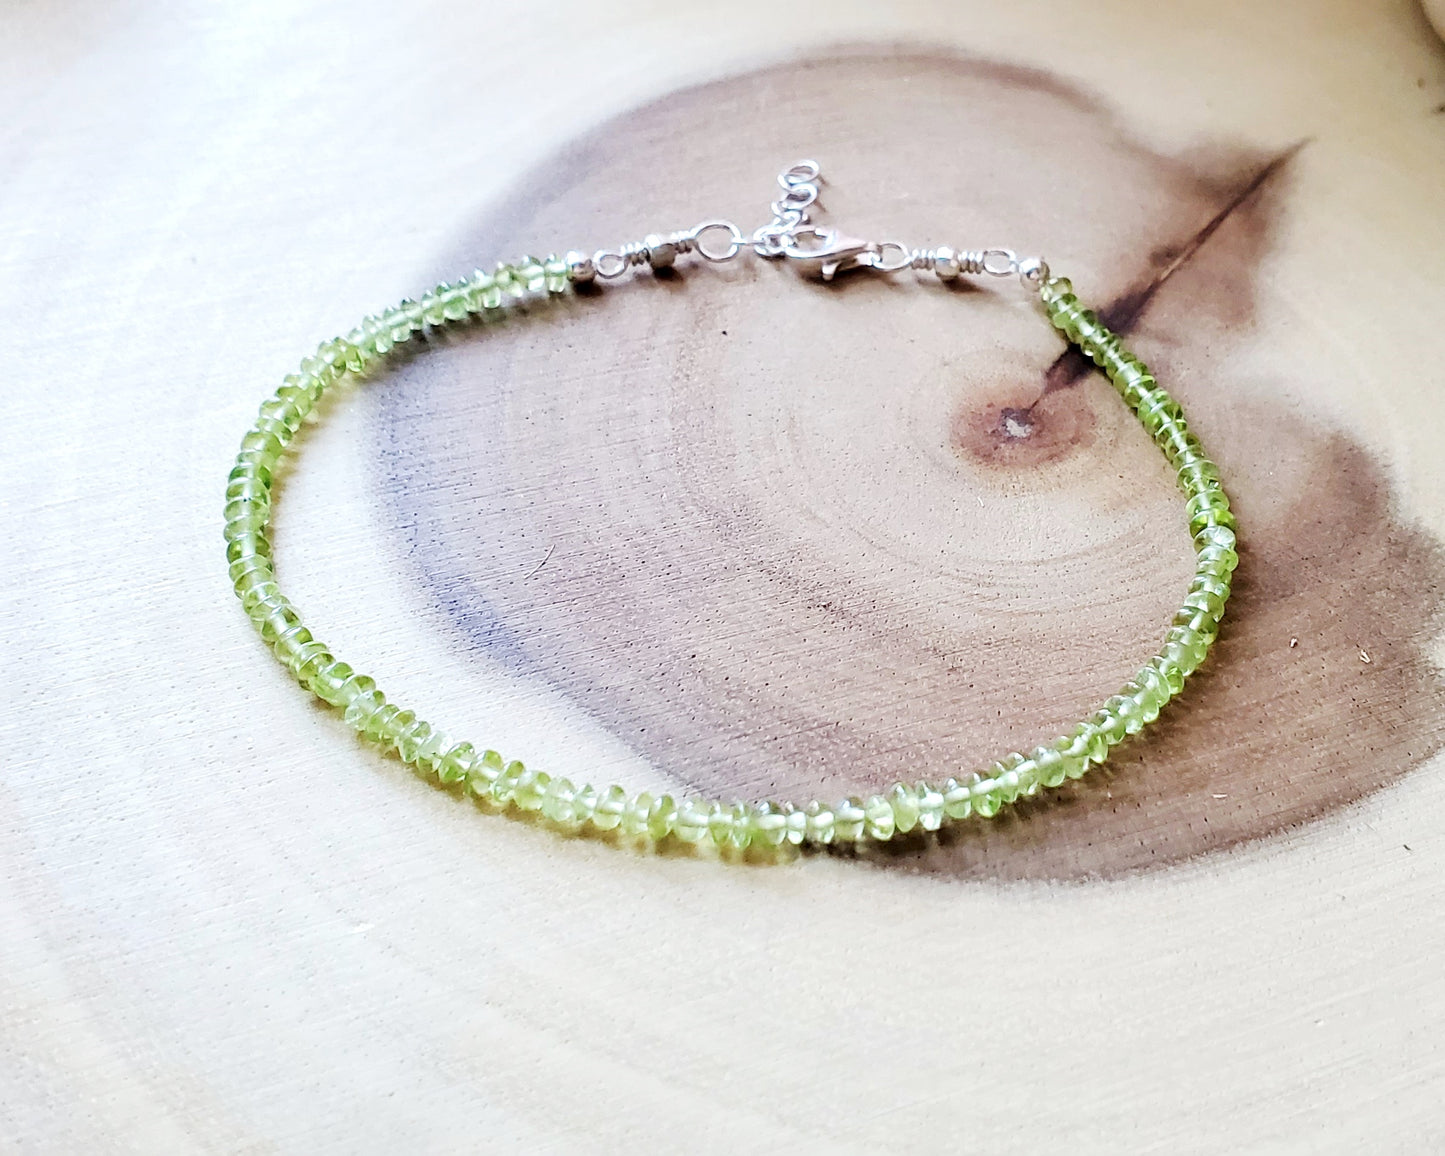  Peridot Beaded Ankle Bracelet, Anklet made with Ethical / Upcycled / Repurposed Peridot, Sterling Silver